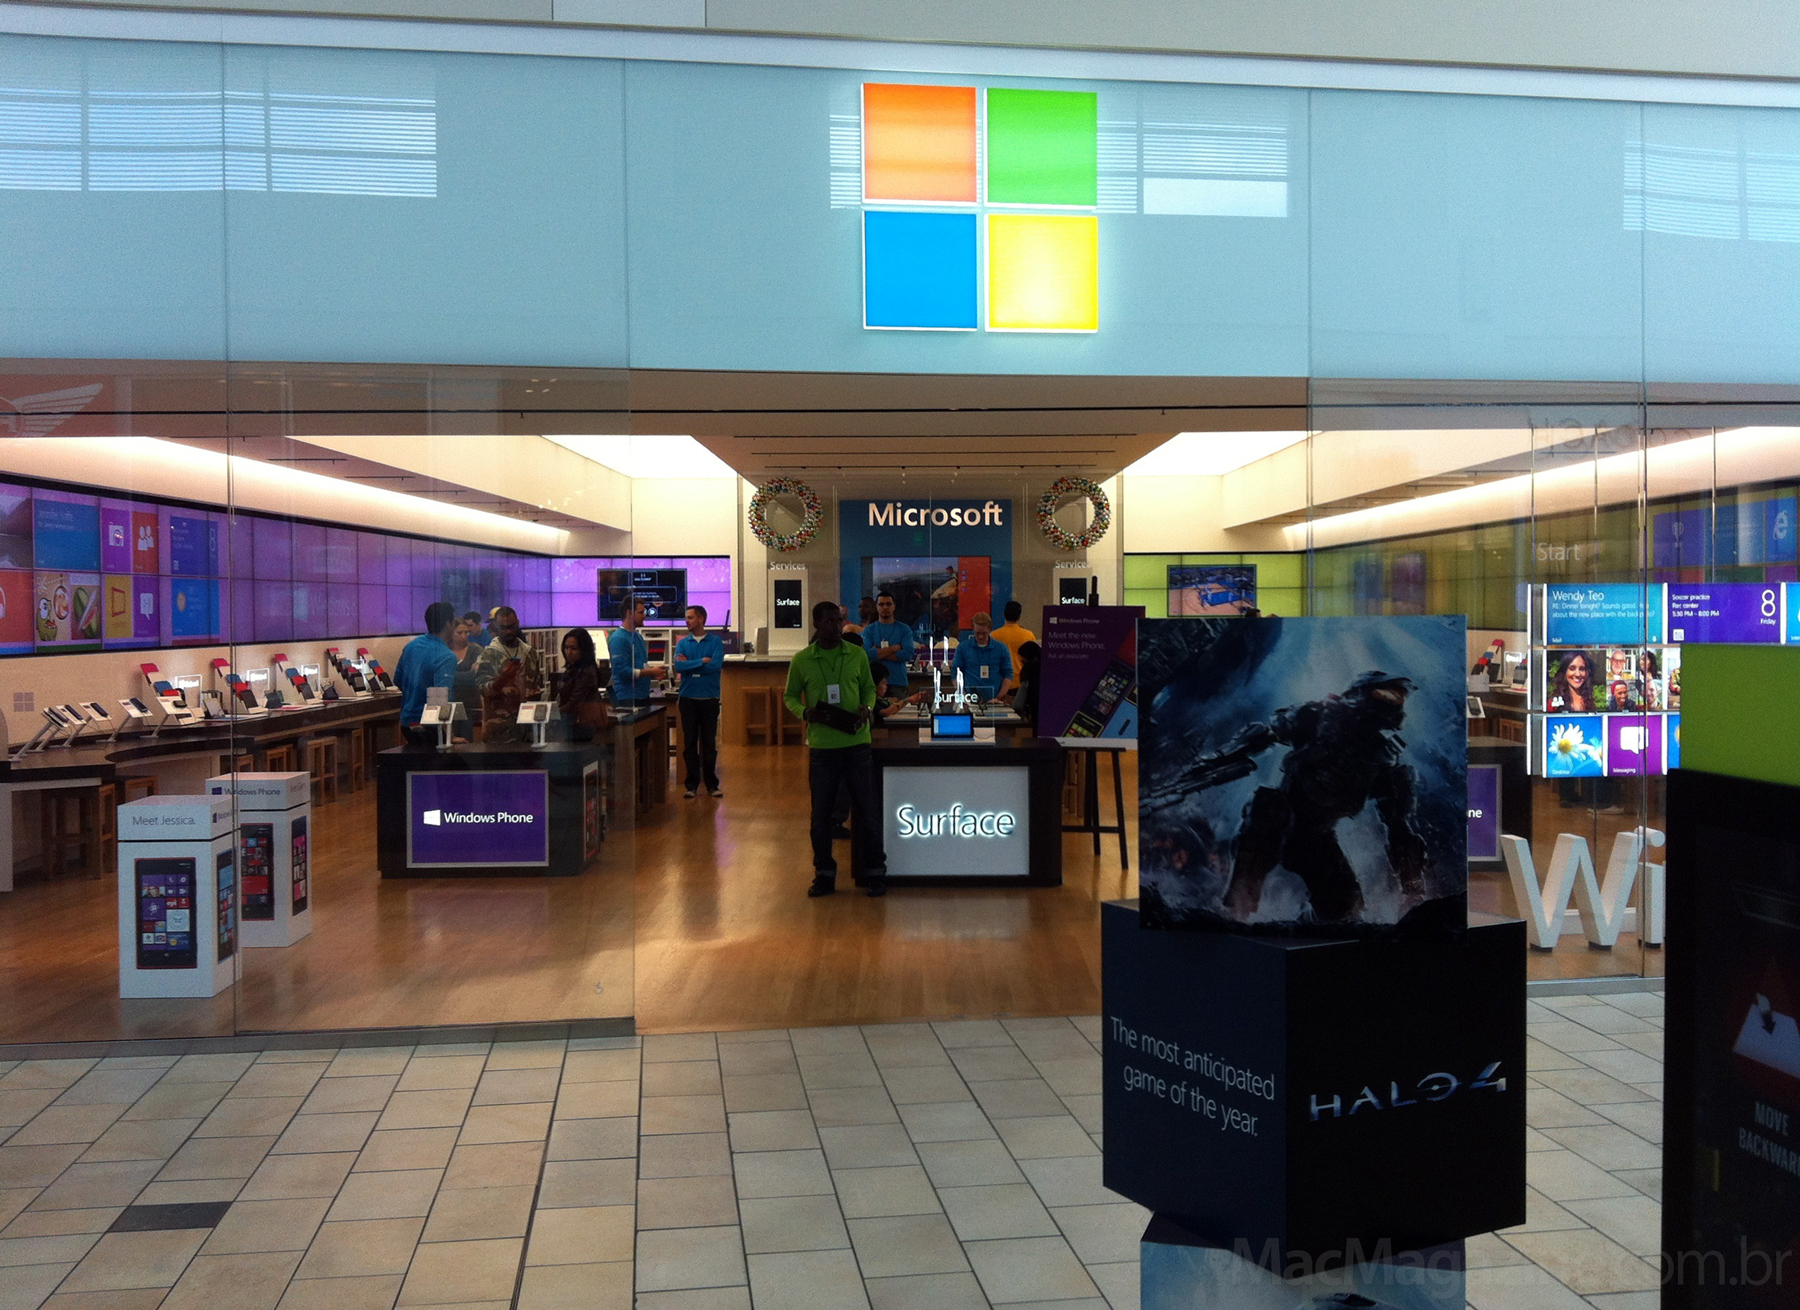 Microsoft stores suffer from a lack of audience; company announces end of Sunrise